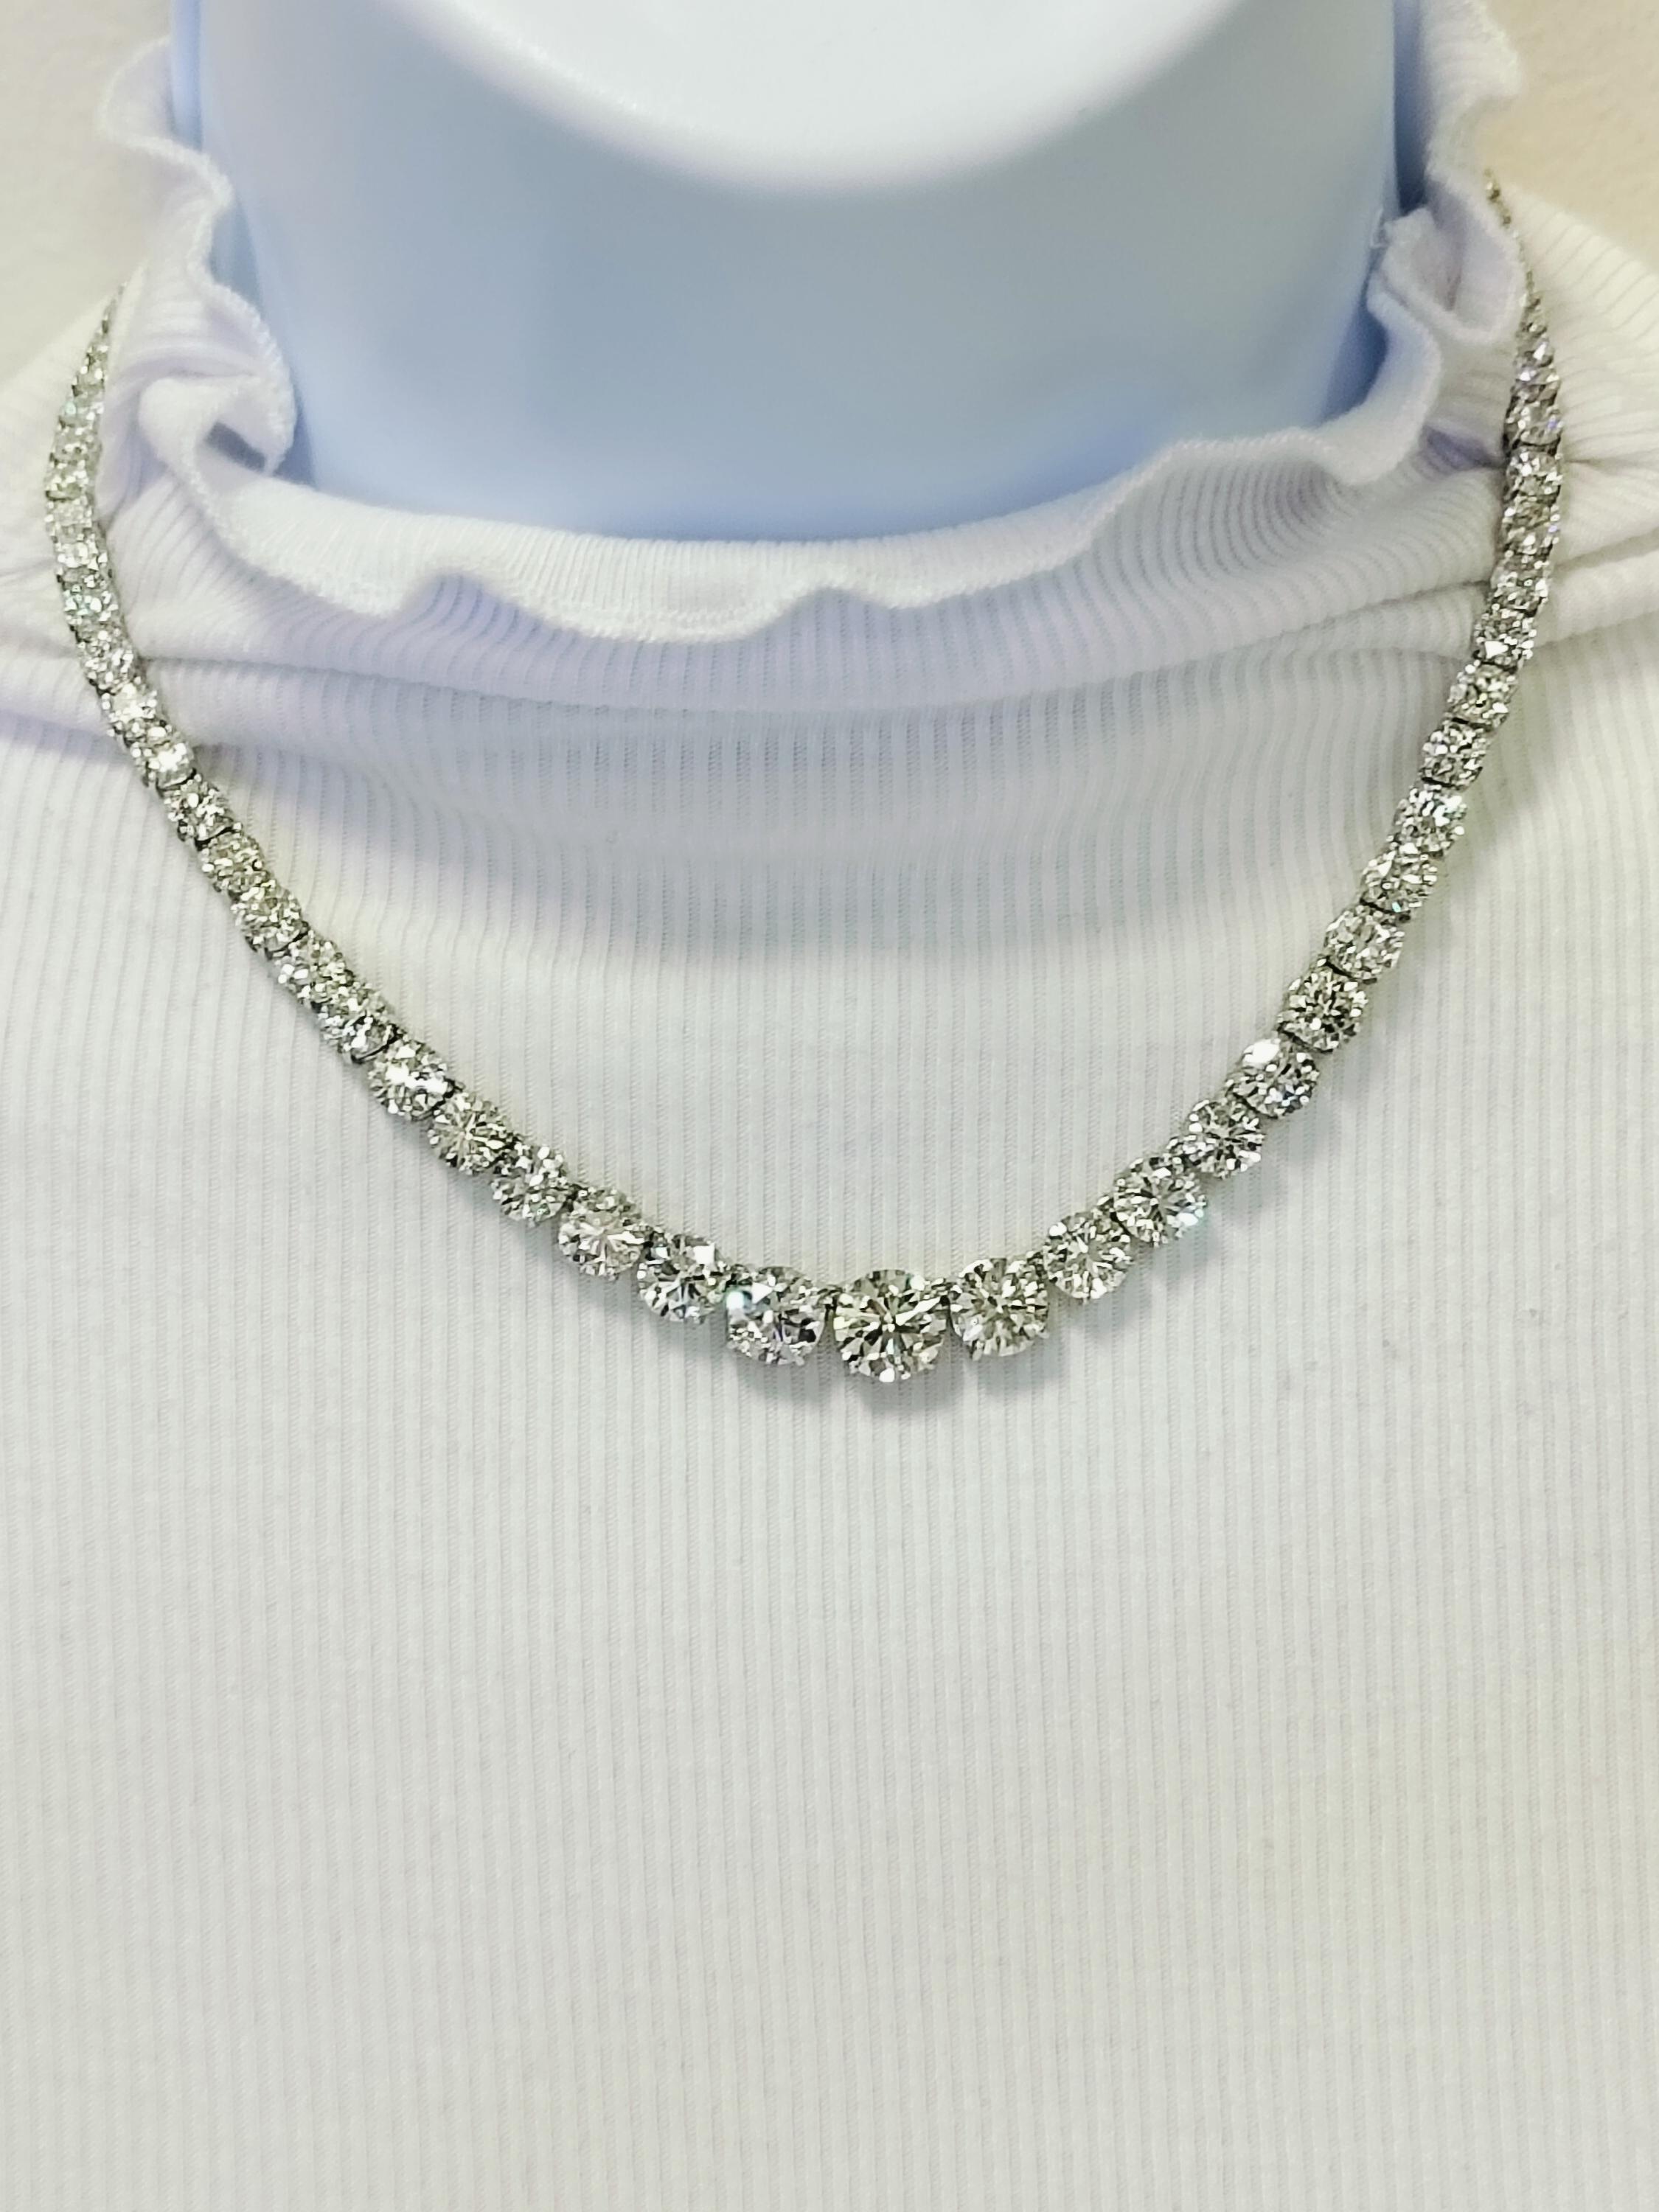 Absolutely stunning riviera featuring 41.82 ct. IJ VS1-SI2 white diamond rounds.  Total of 75 stones.  Each stone has a GIA certificate.  Length is 15